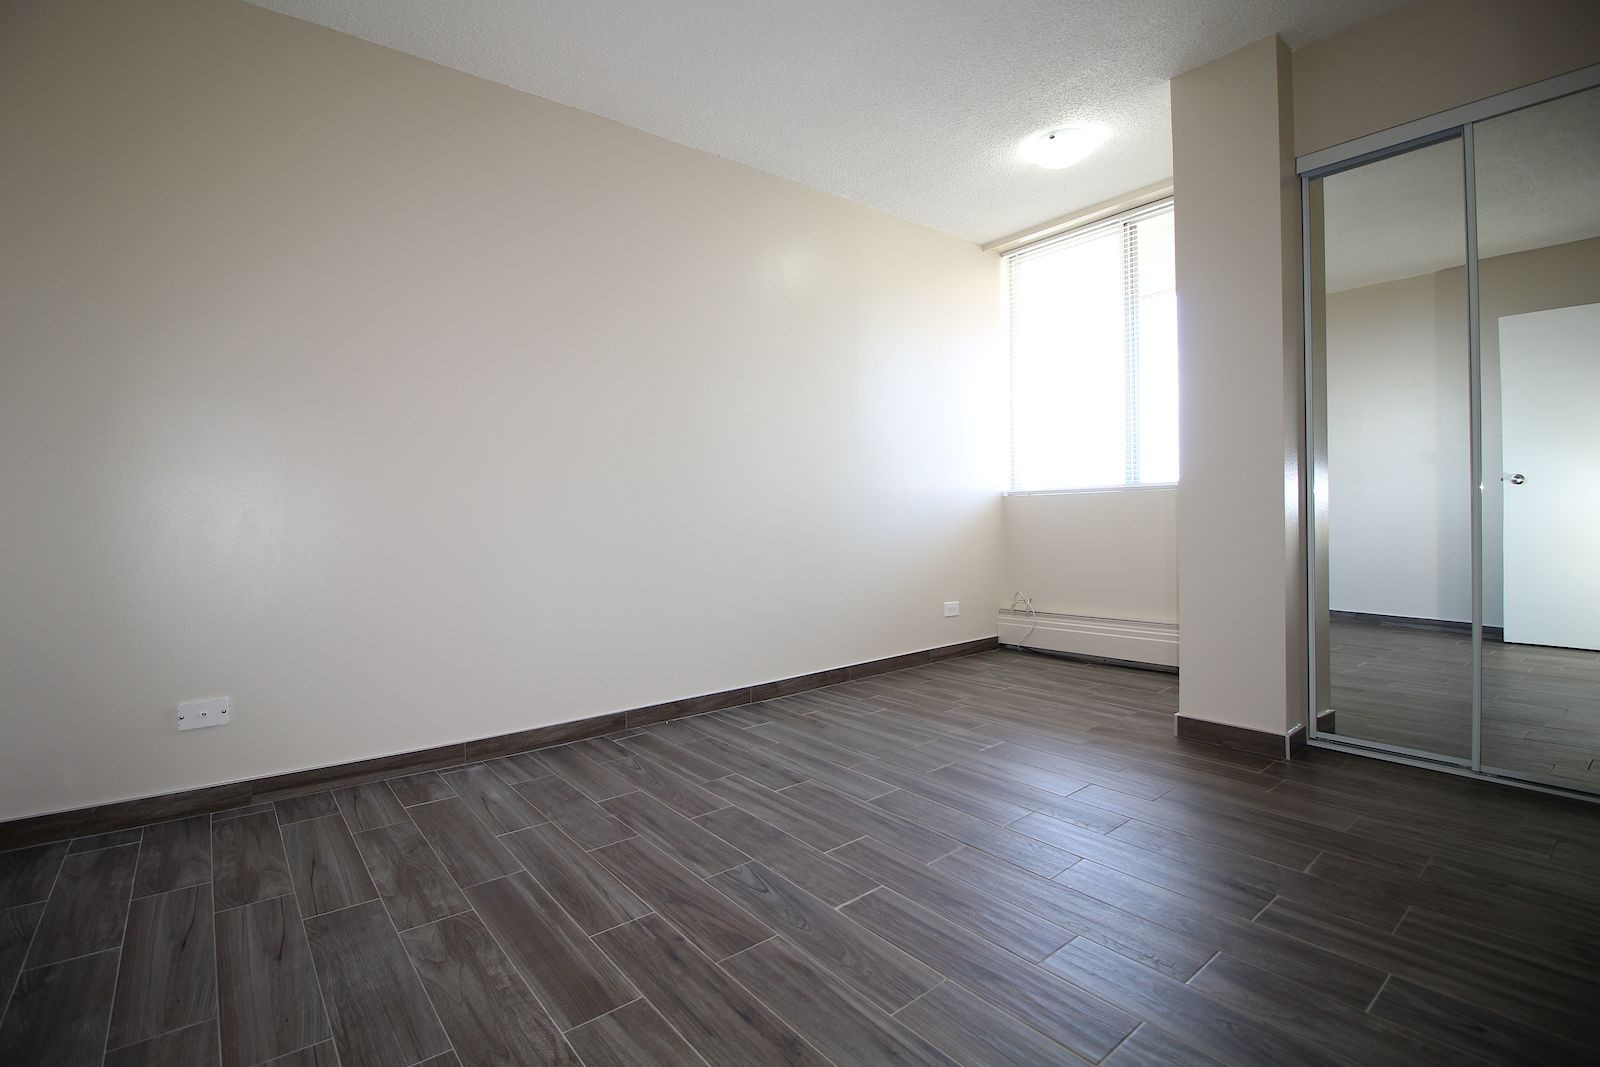 27 Unique Alberta Hardwood Flooring Reviews 2024 free download alberta hardwood flooring reviews of calgary apartment for rent downtown heart of downtown this clean throughout completely renovated 2 bedroom stunning apartment